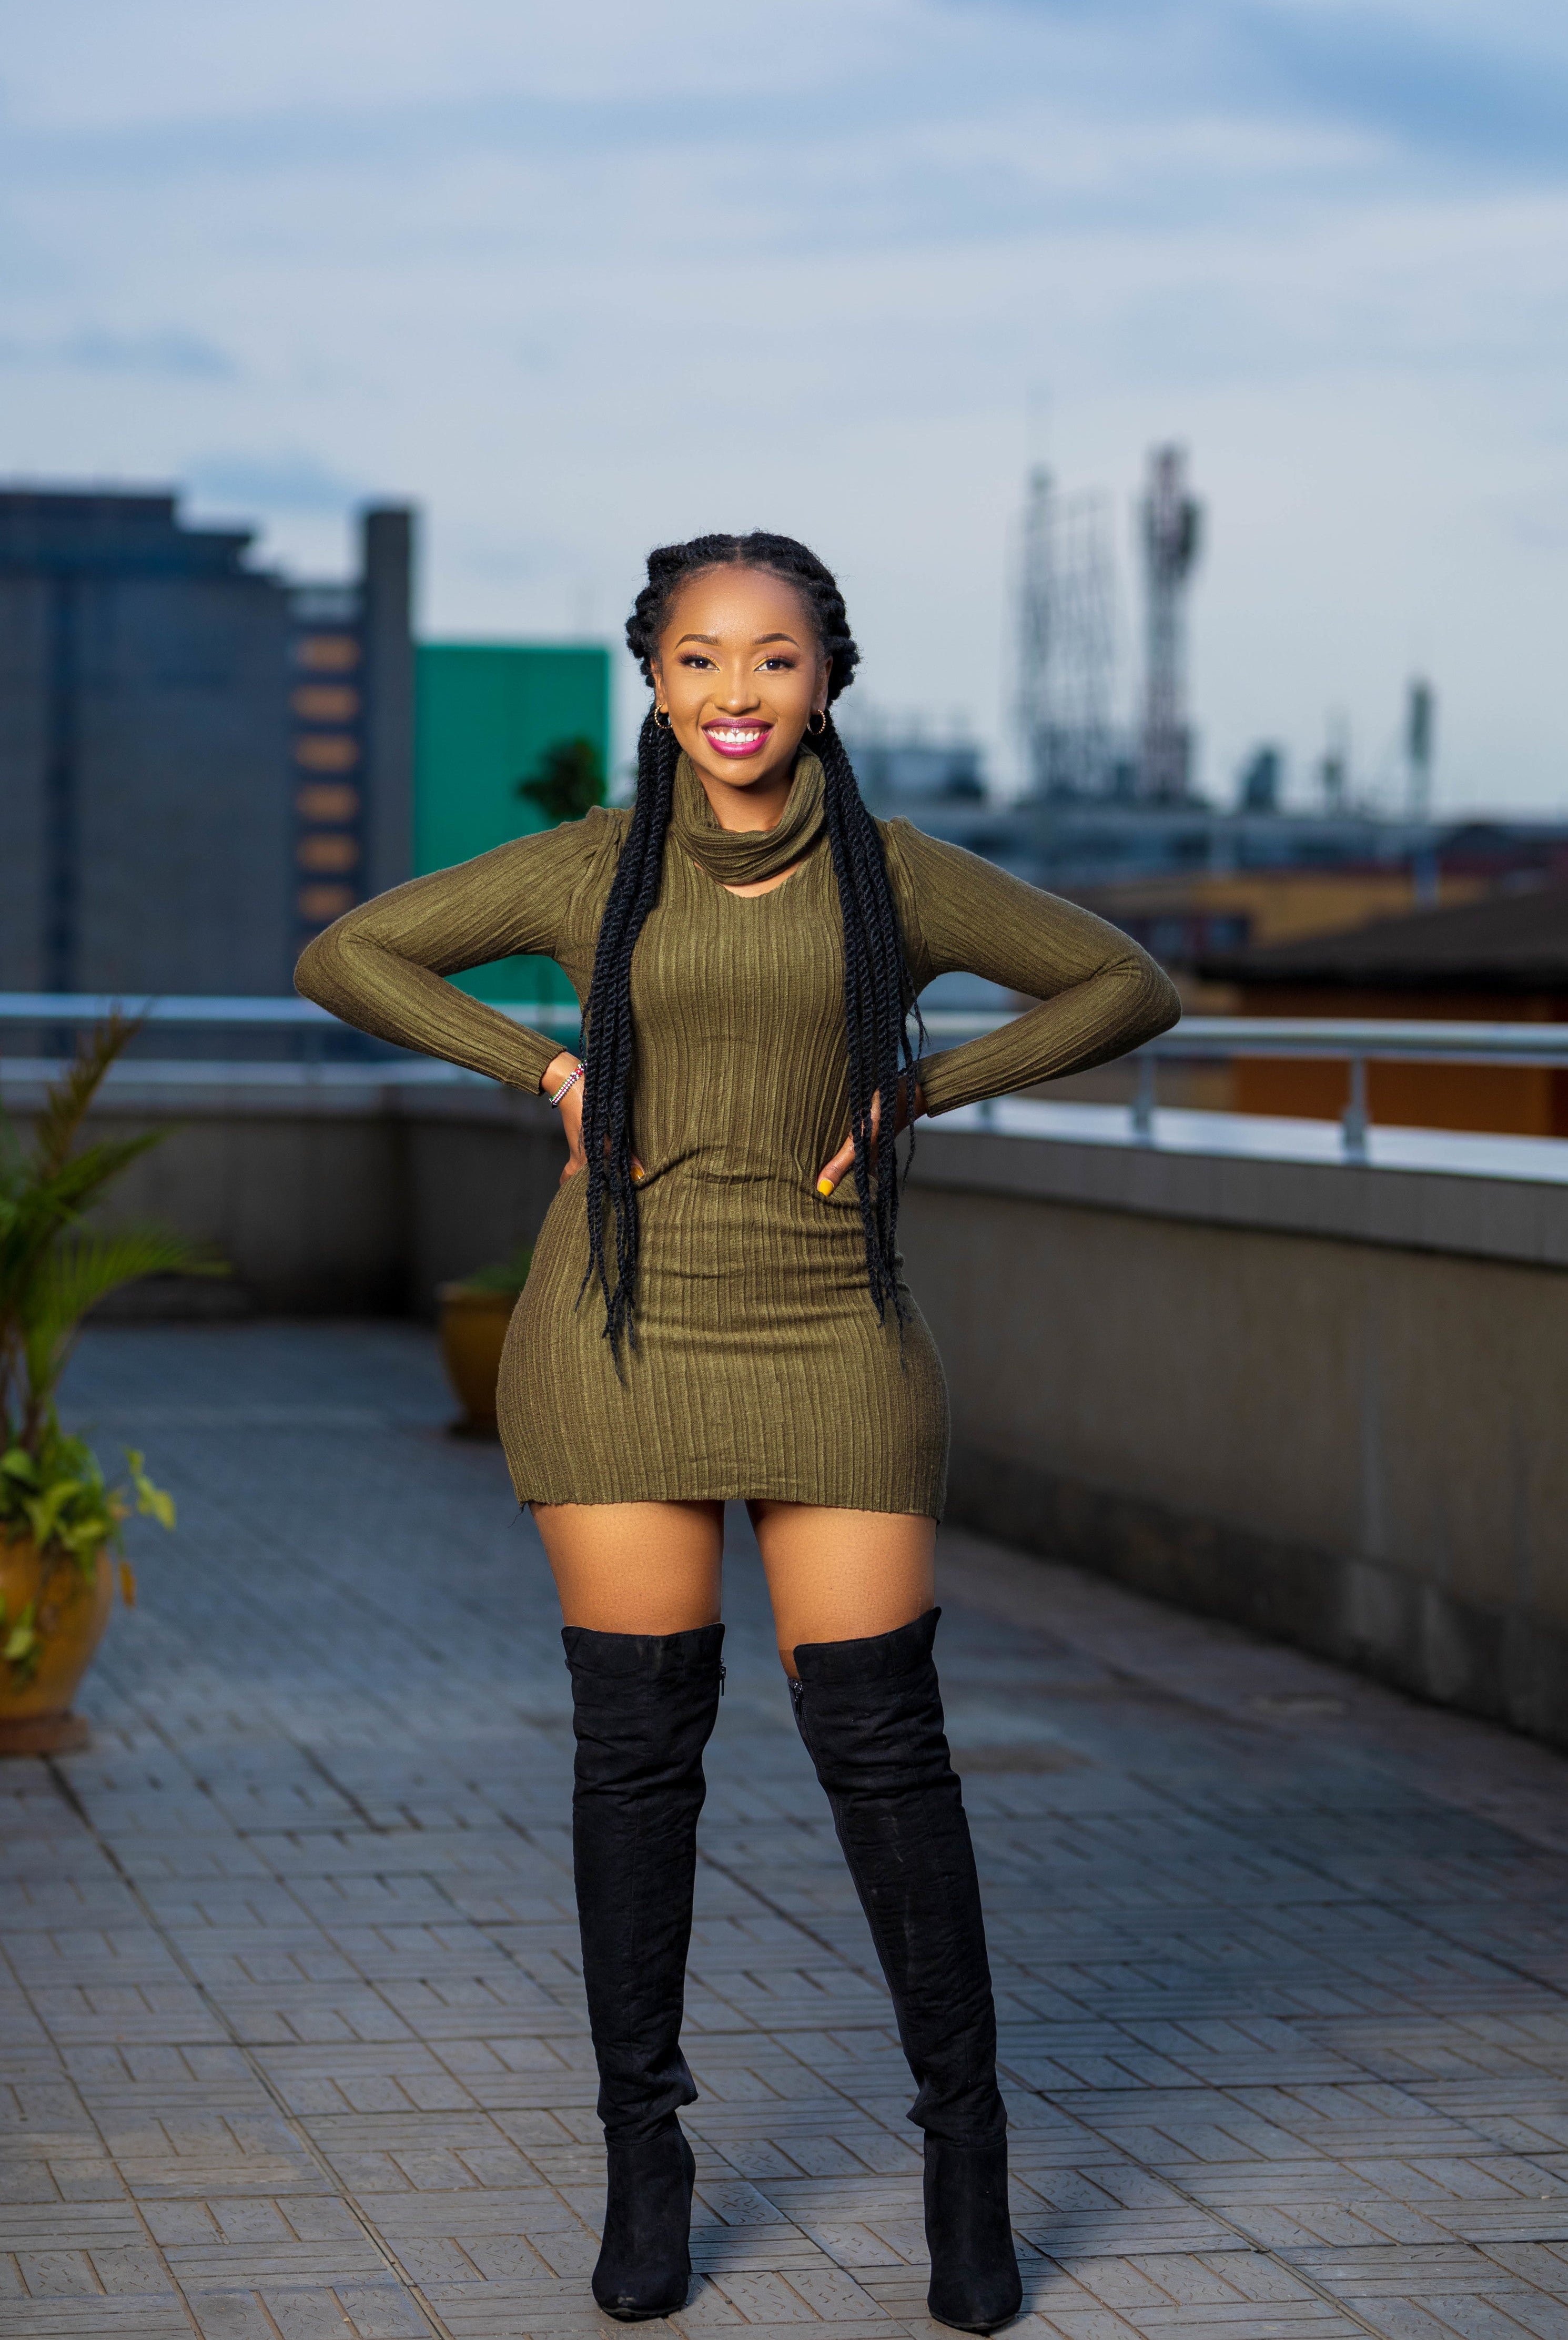 Kinsley Sweater - Shop Kenya - Affordable Fashion Kinsley Sweater hiiii_style Shirts & Tops kinsley-sweater August 2022, cessy._.patel, officialkoicurvy, winnie_njenga Shop Kenya - Affordable Fashion